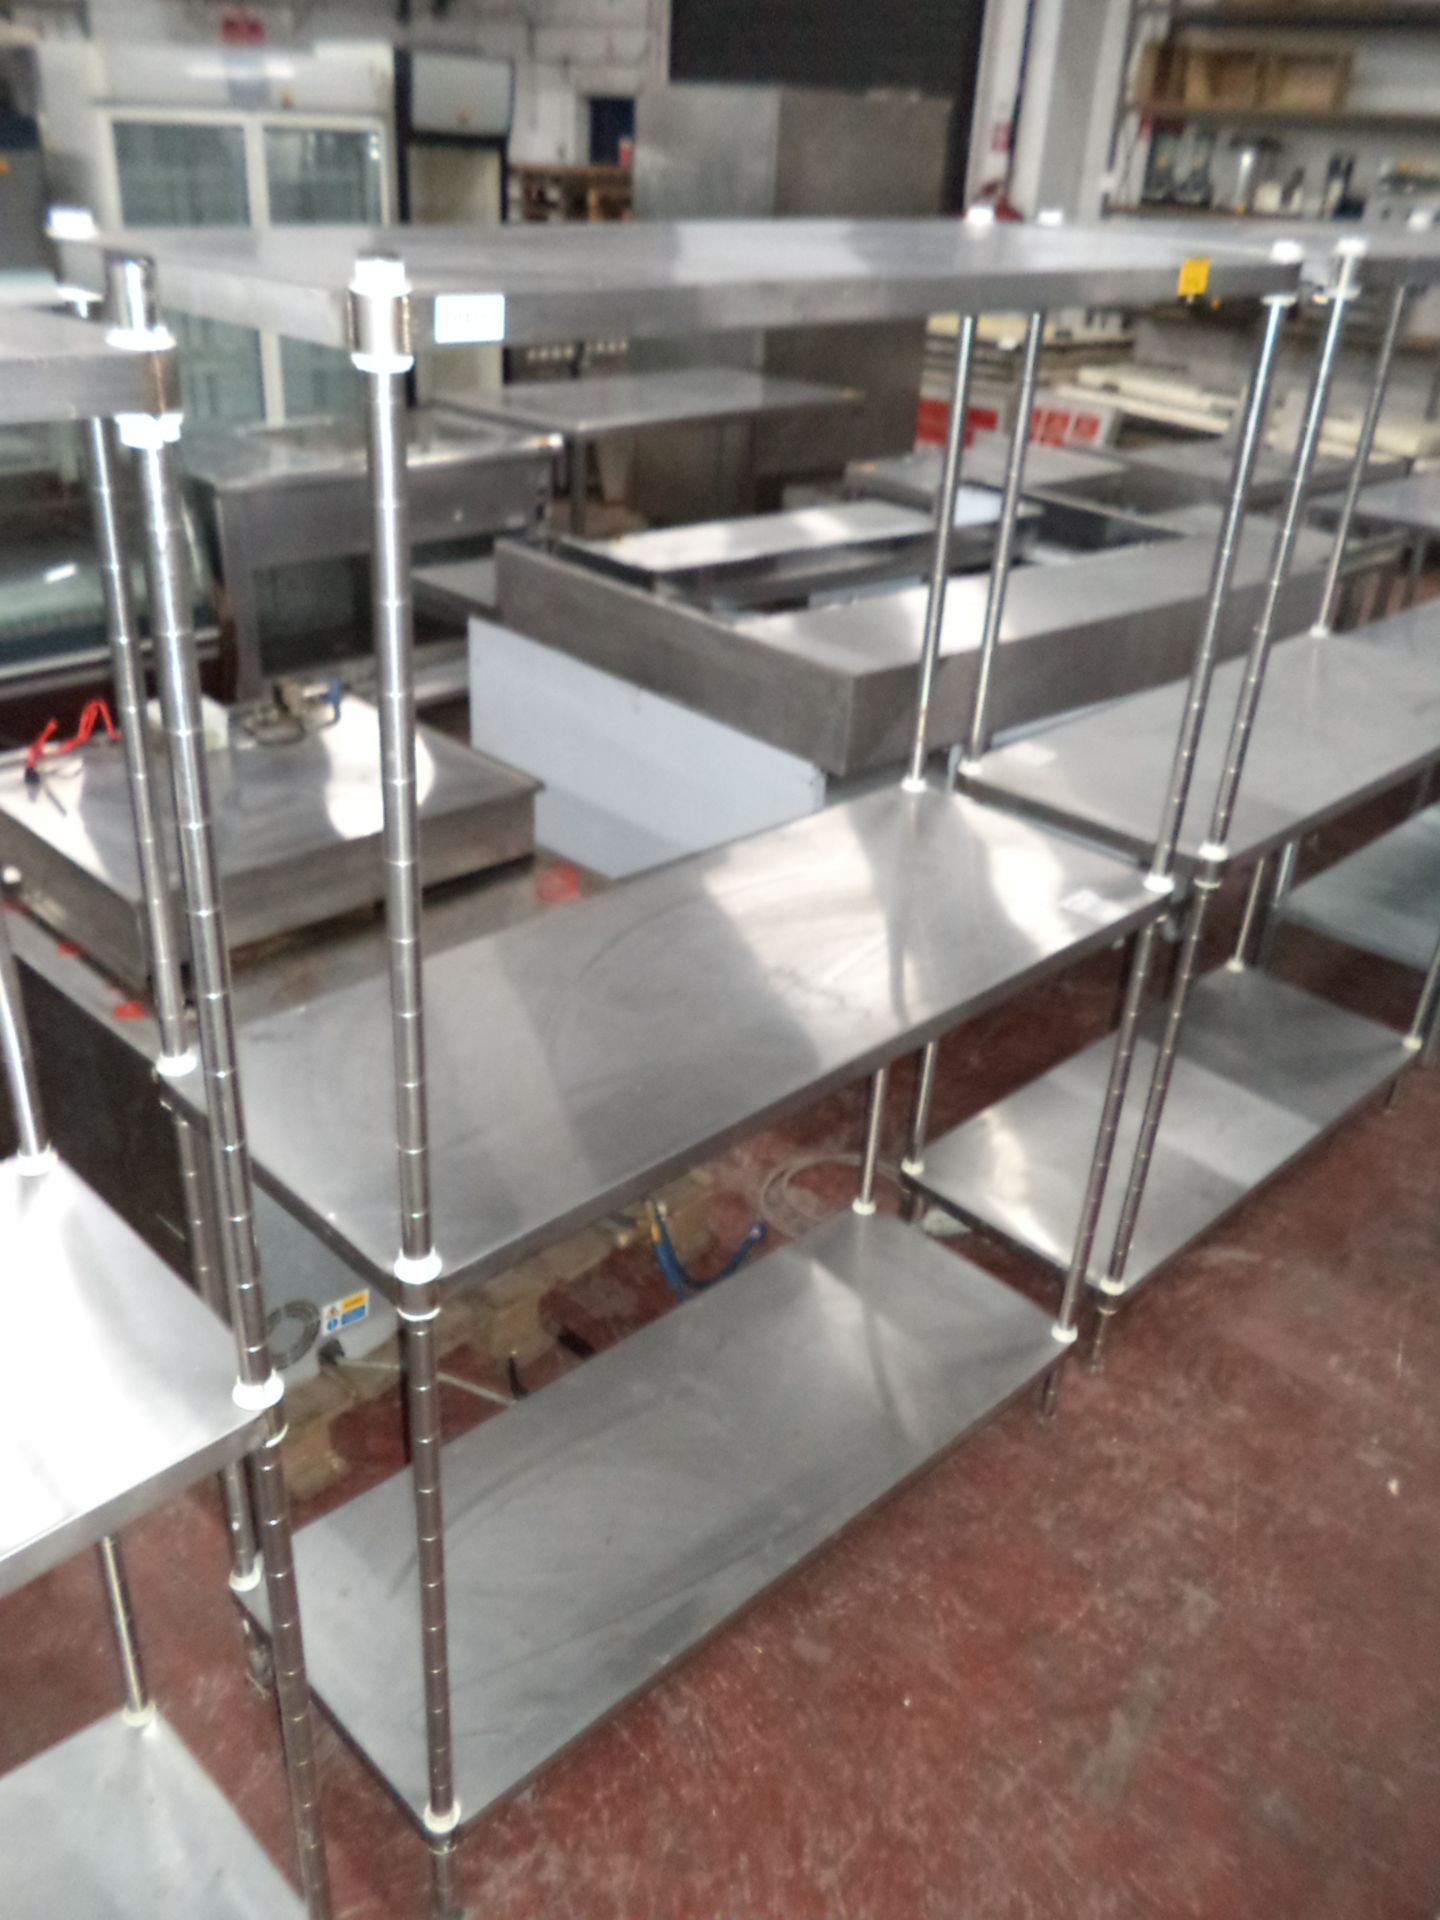 Stainless steel 3-level racking unit IMPORTANT: Please remember goods successfully bid upon must - Image 2 of 2